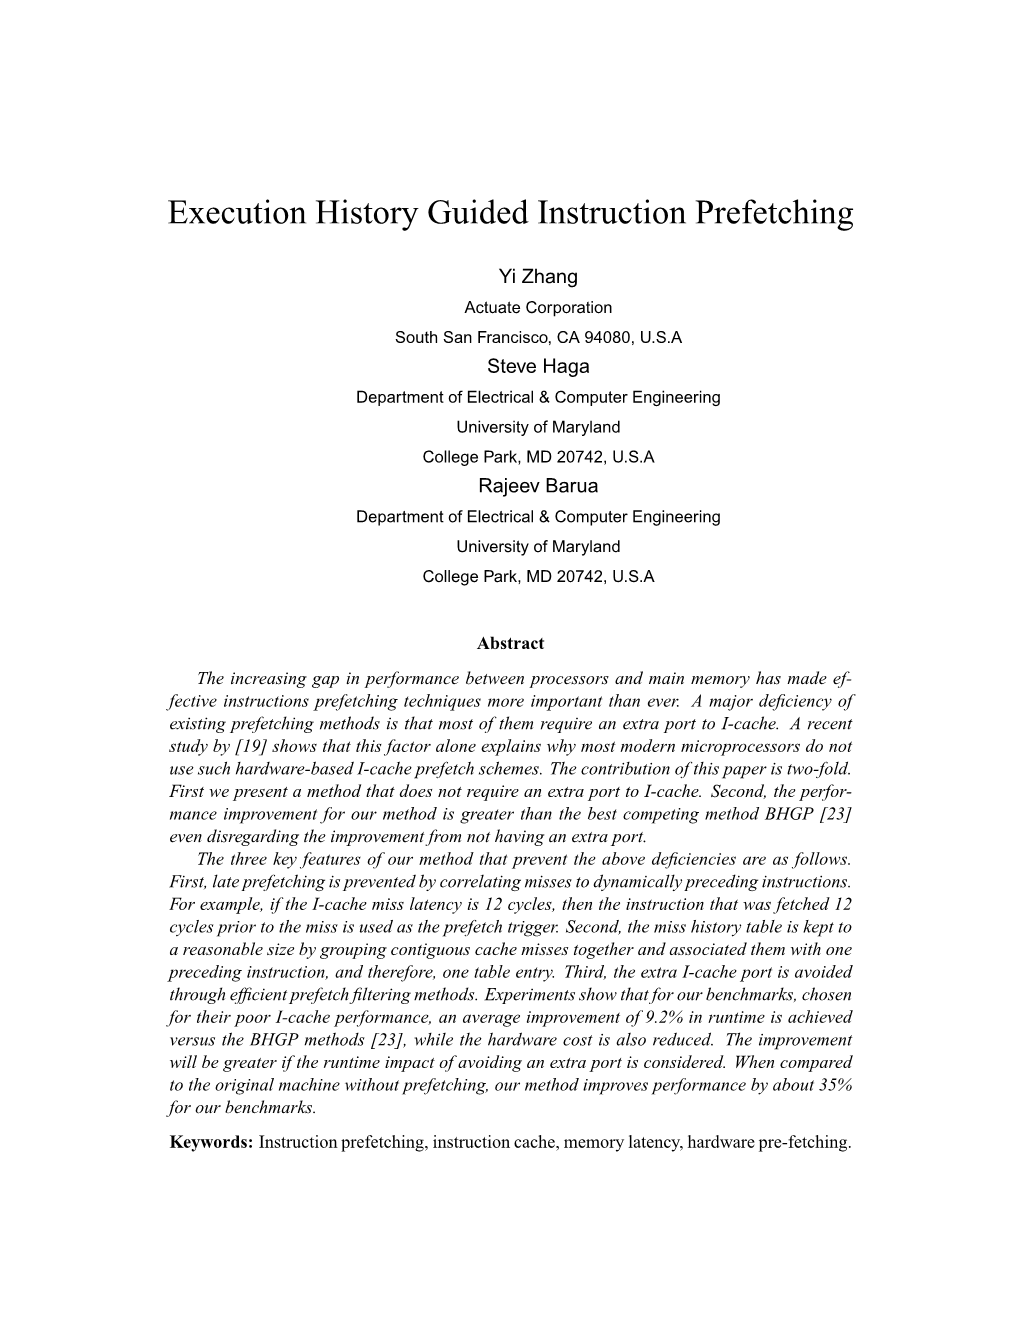 Execution History Guided Instruction Prefetching